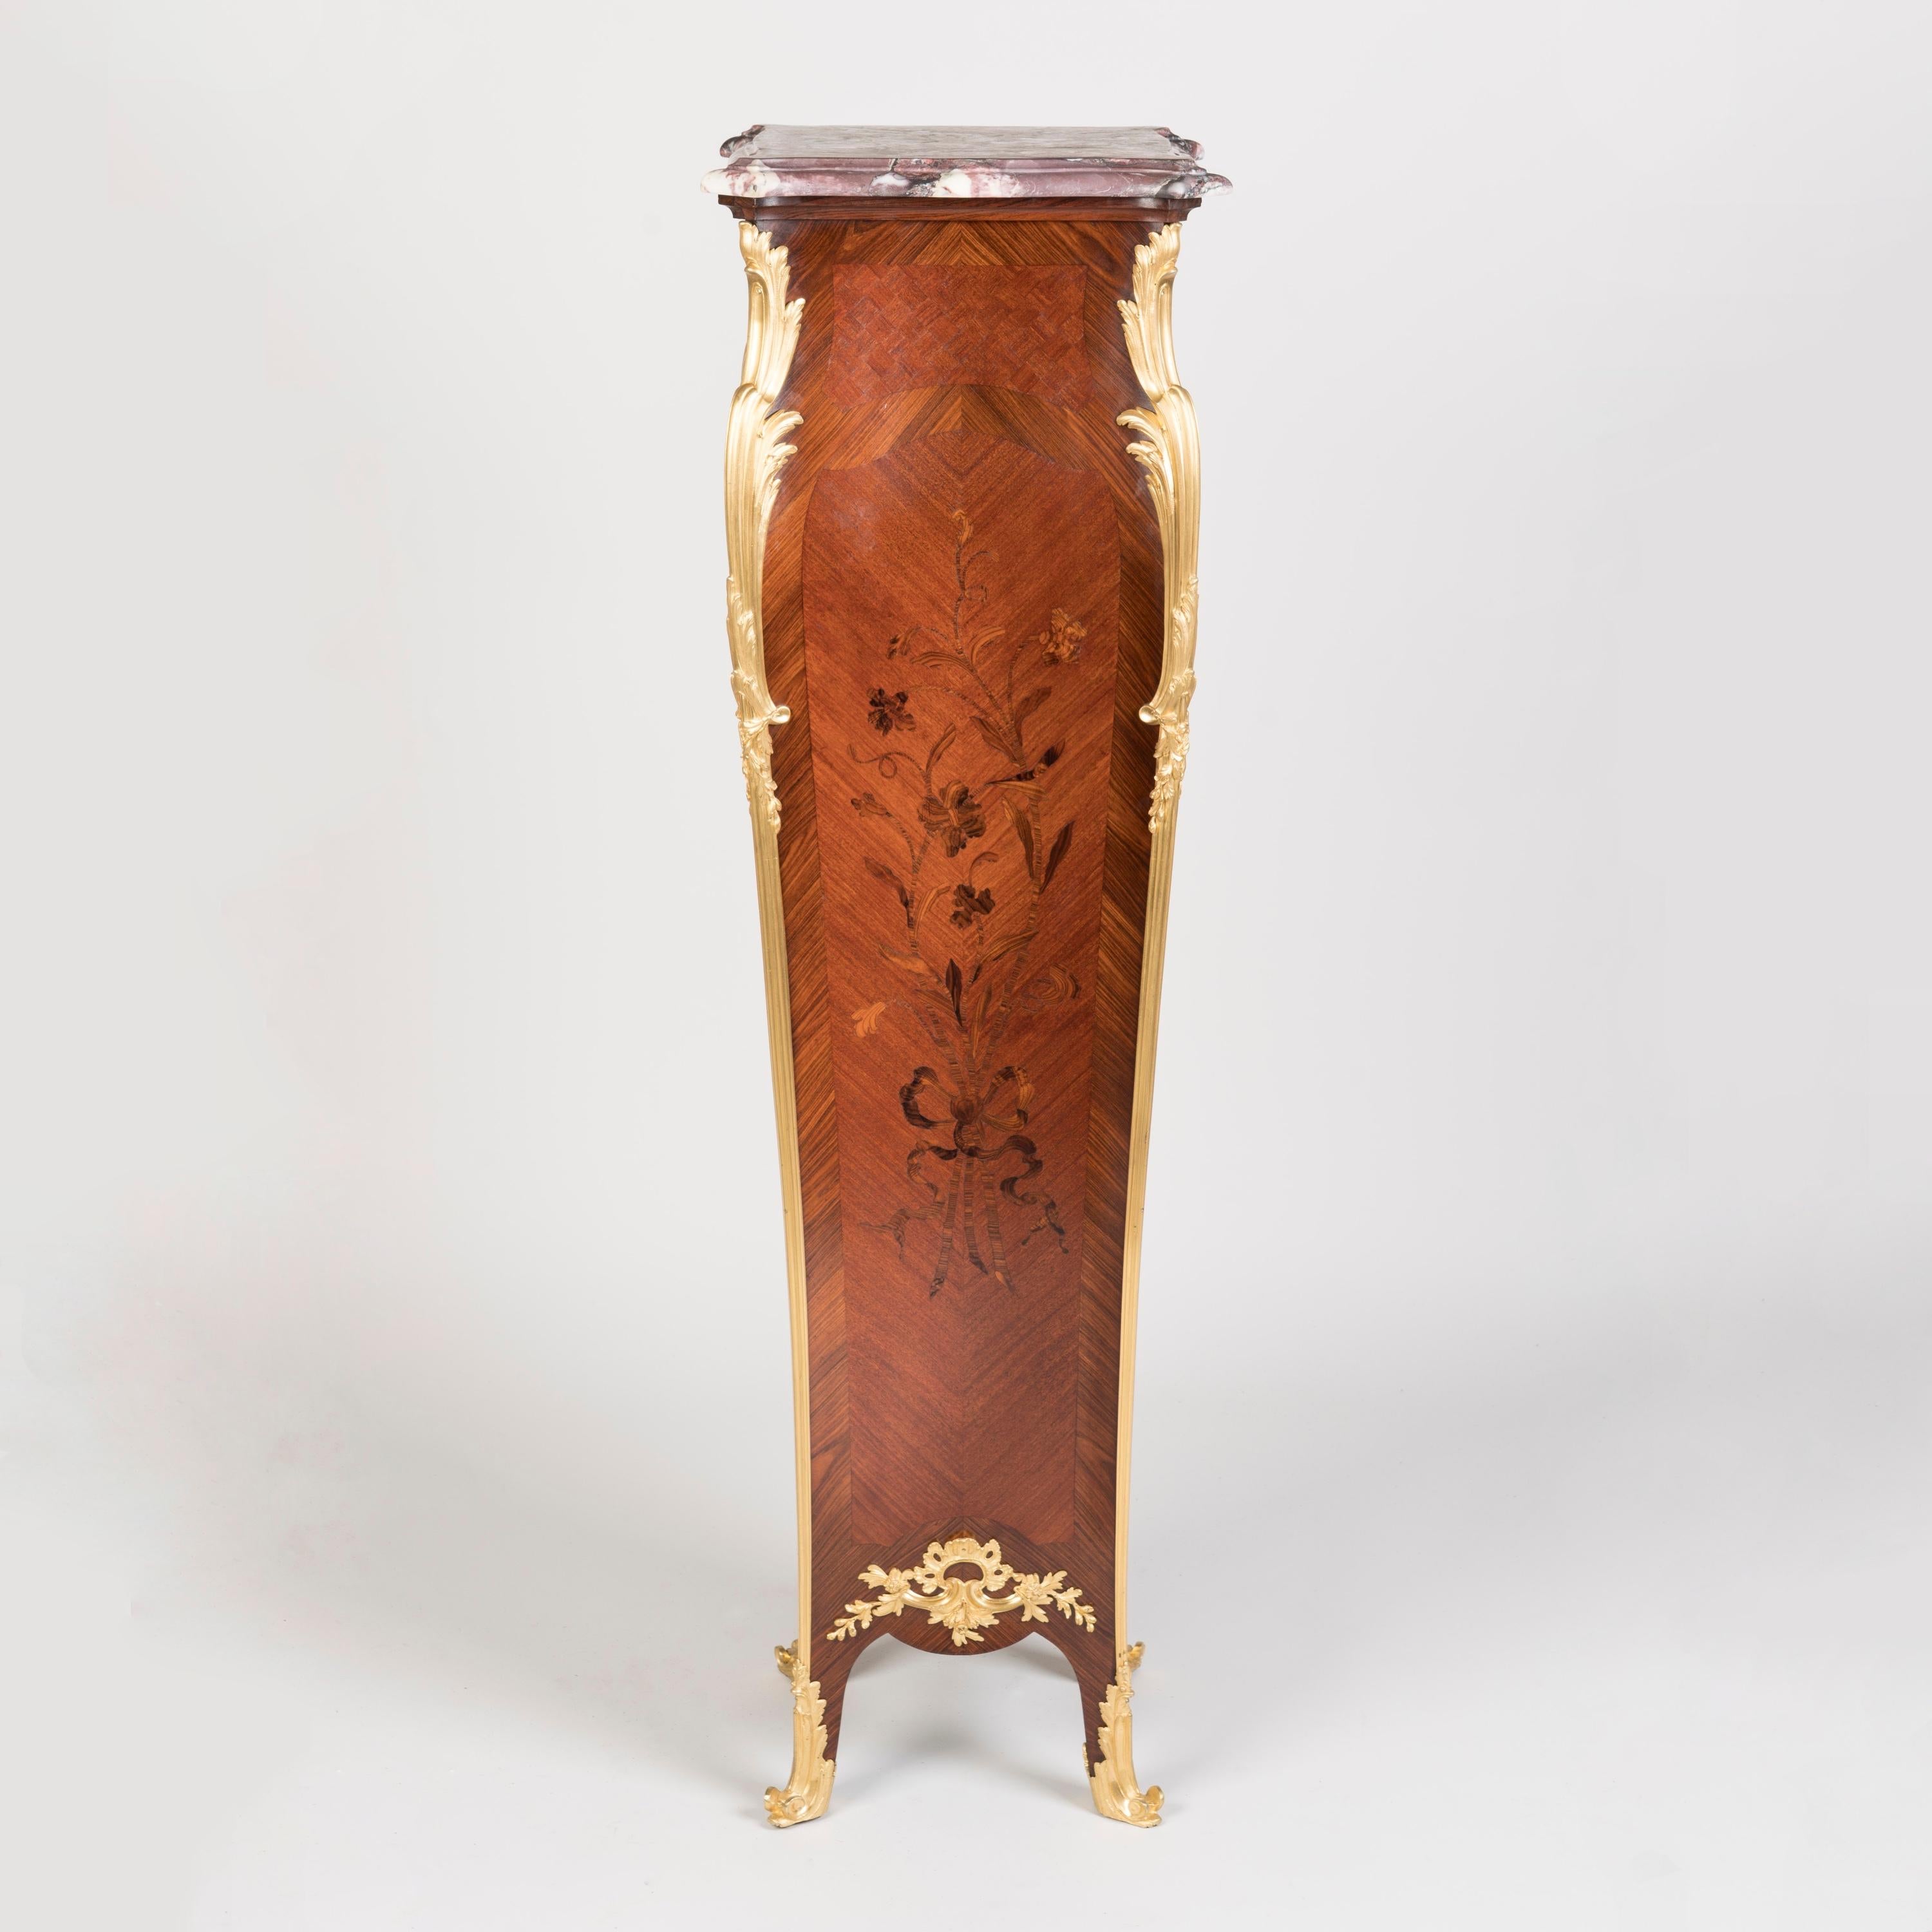 19th Century Marquetry Inlaid Bombé Pedestal in the Louis XV Style by Millet In Good Condition For Sale In London, GB